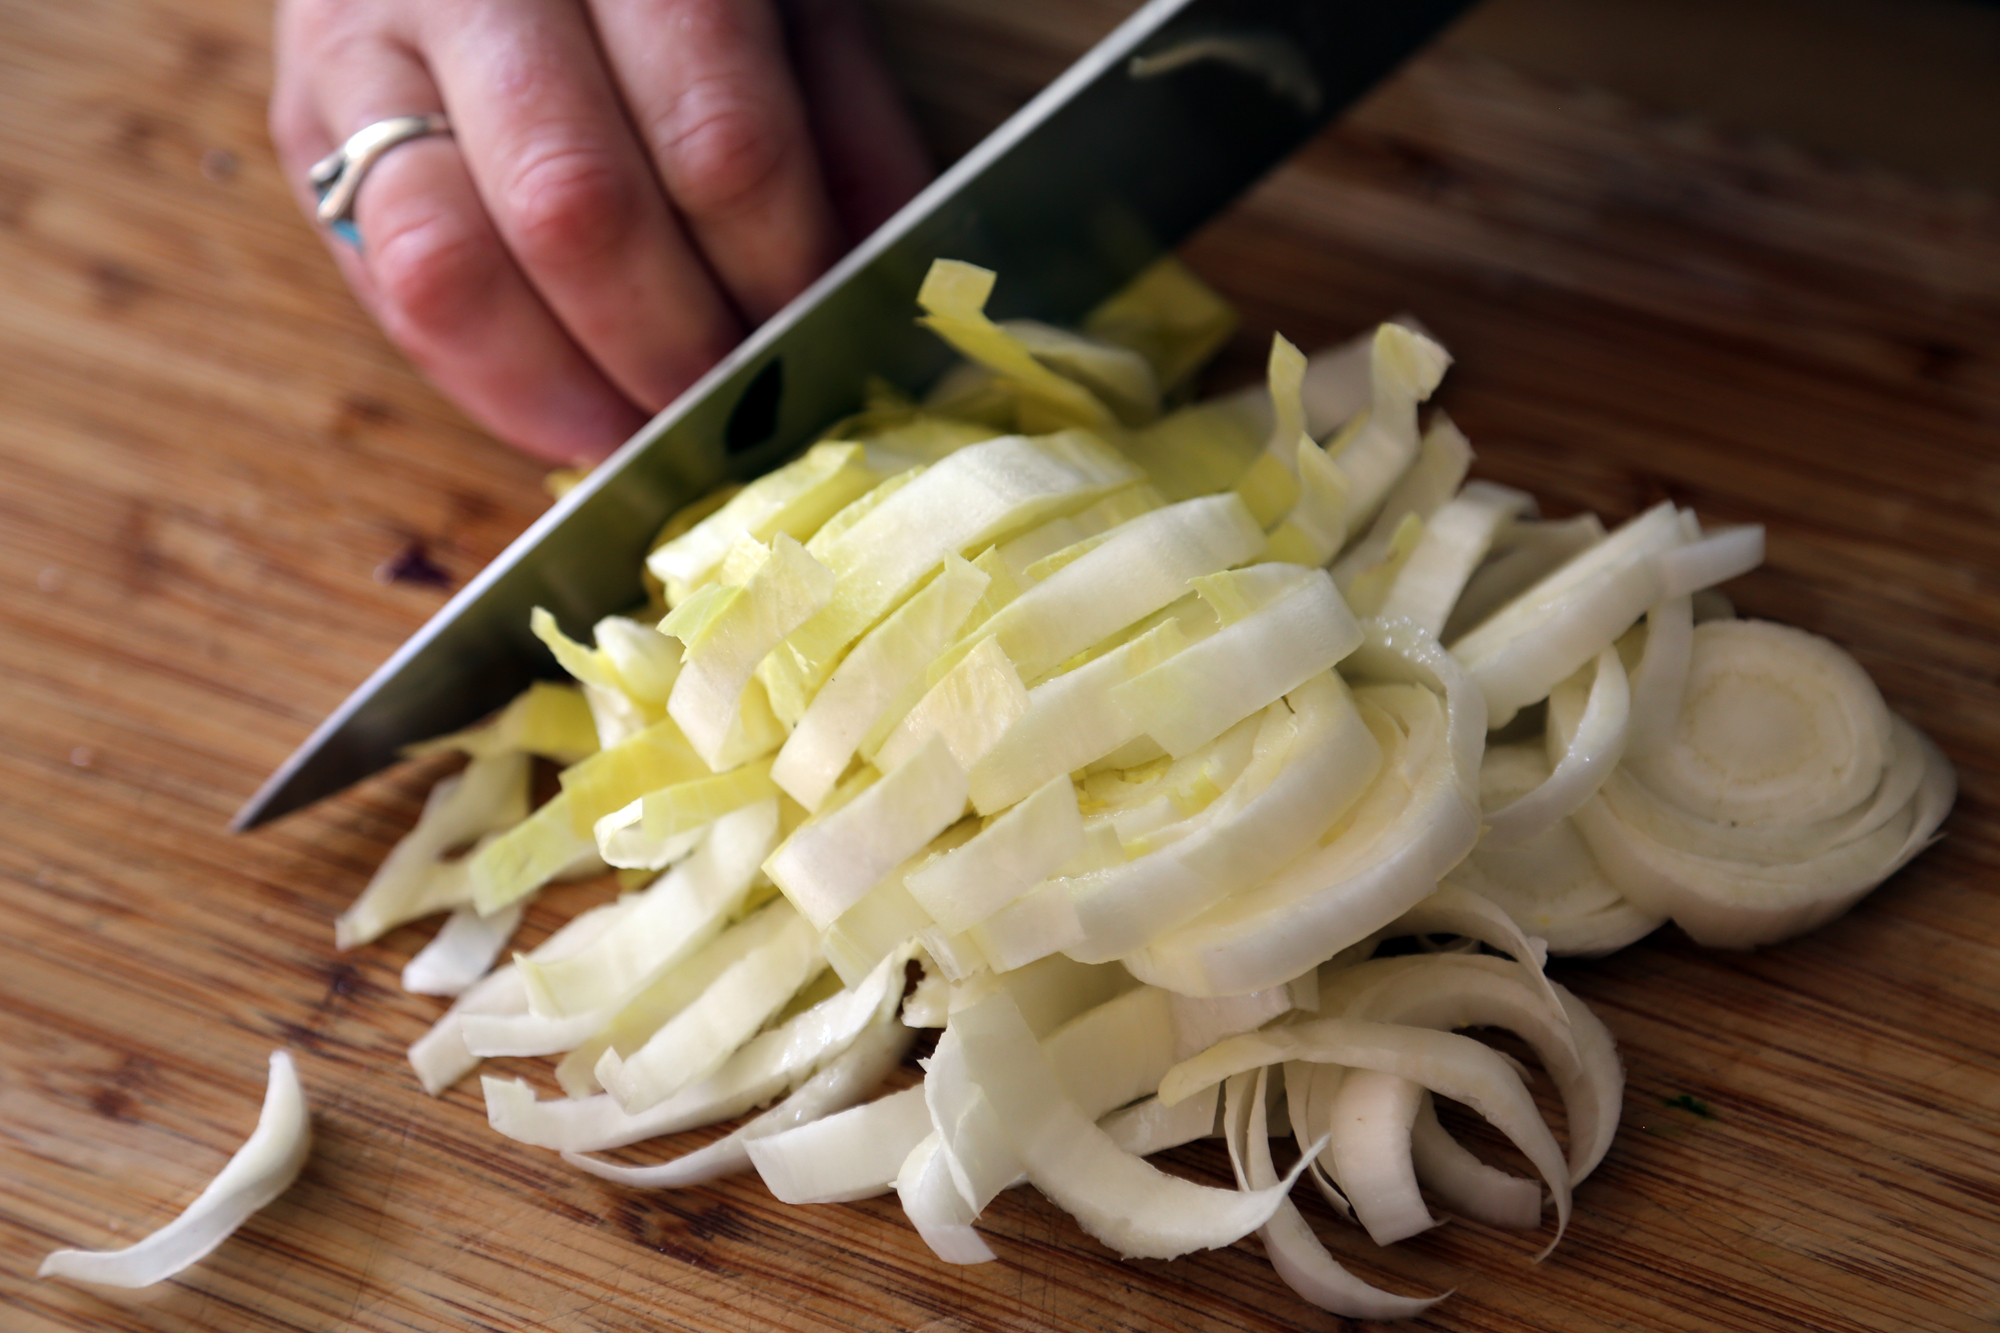 1 endive, thinly sliced.